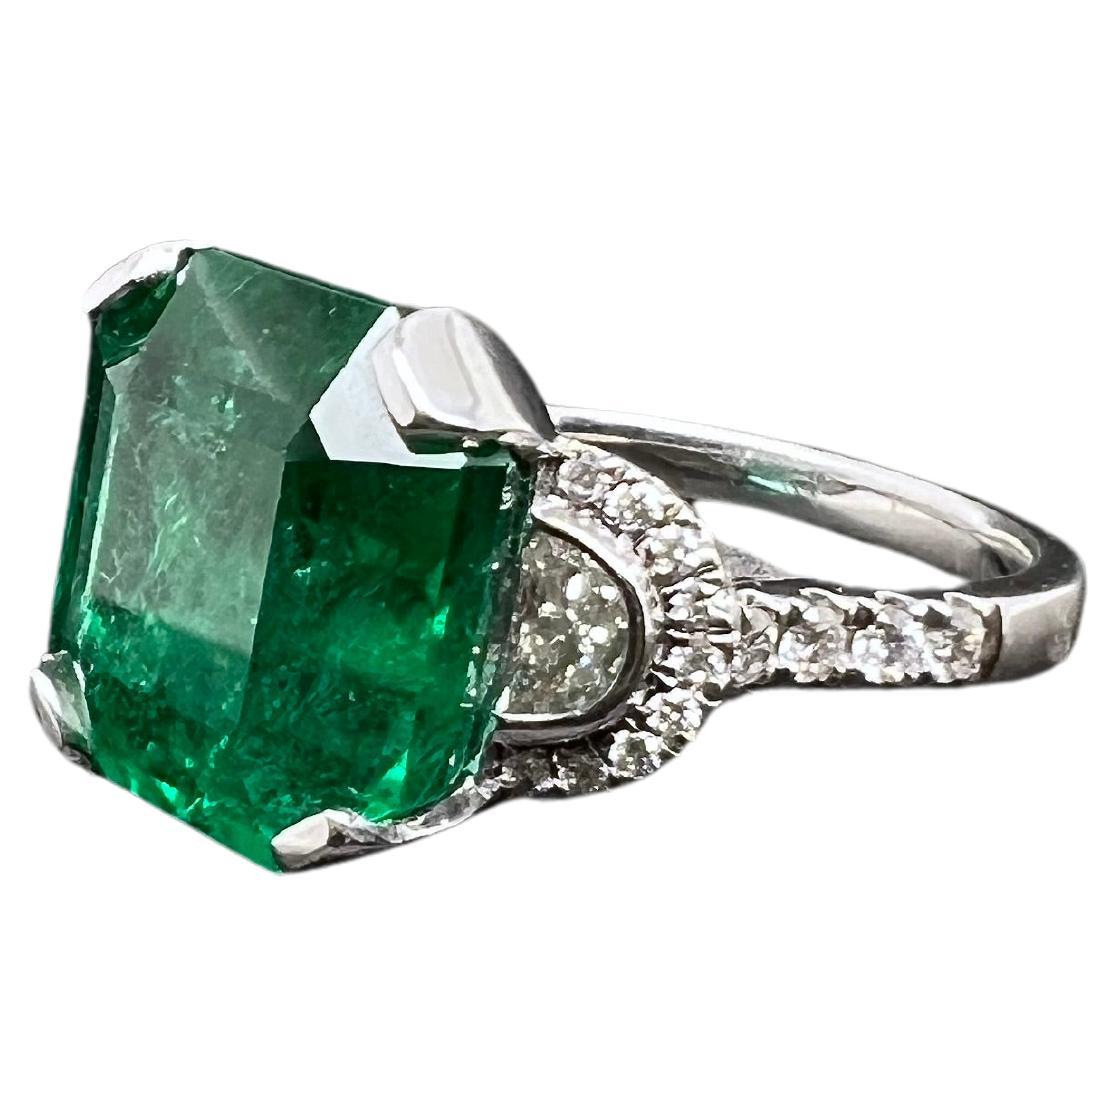 This vibrant Zambian emerald is set in a modified 3 stone style ring with 2 half moon diamonds on the sides with round brilliant diamonds finishing off the masterpiece. The lust, green emerald is the focal point and showcases amazing color in this